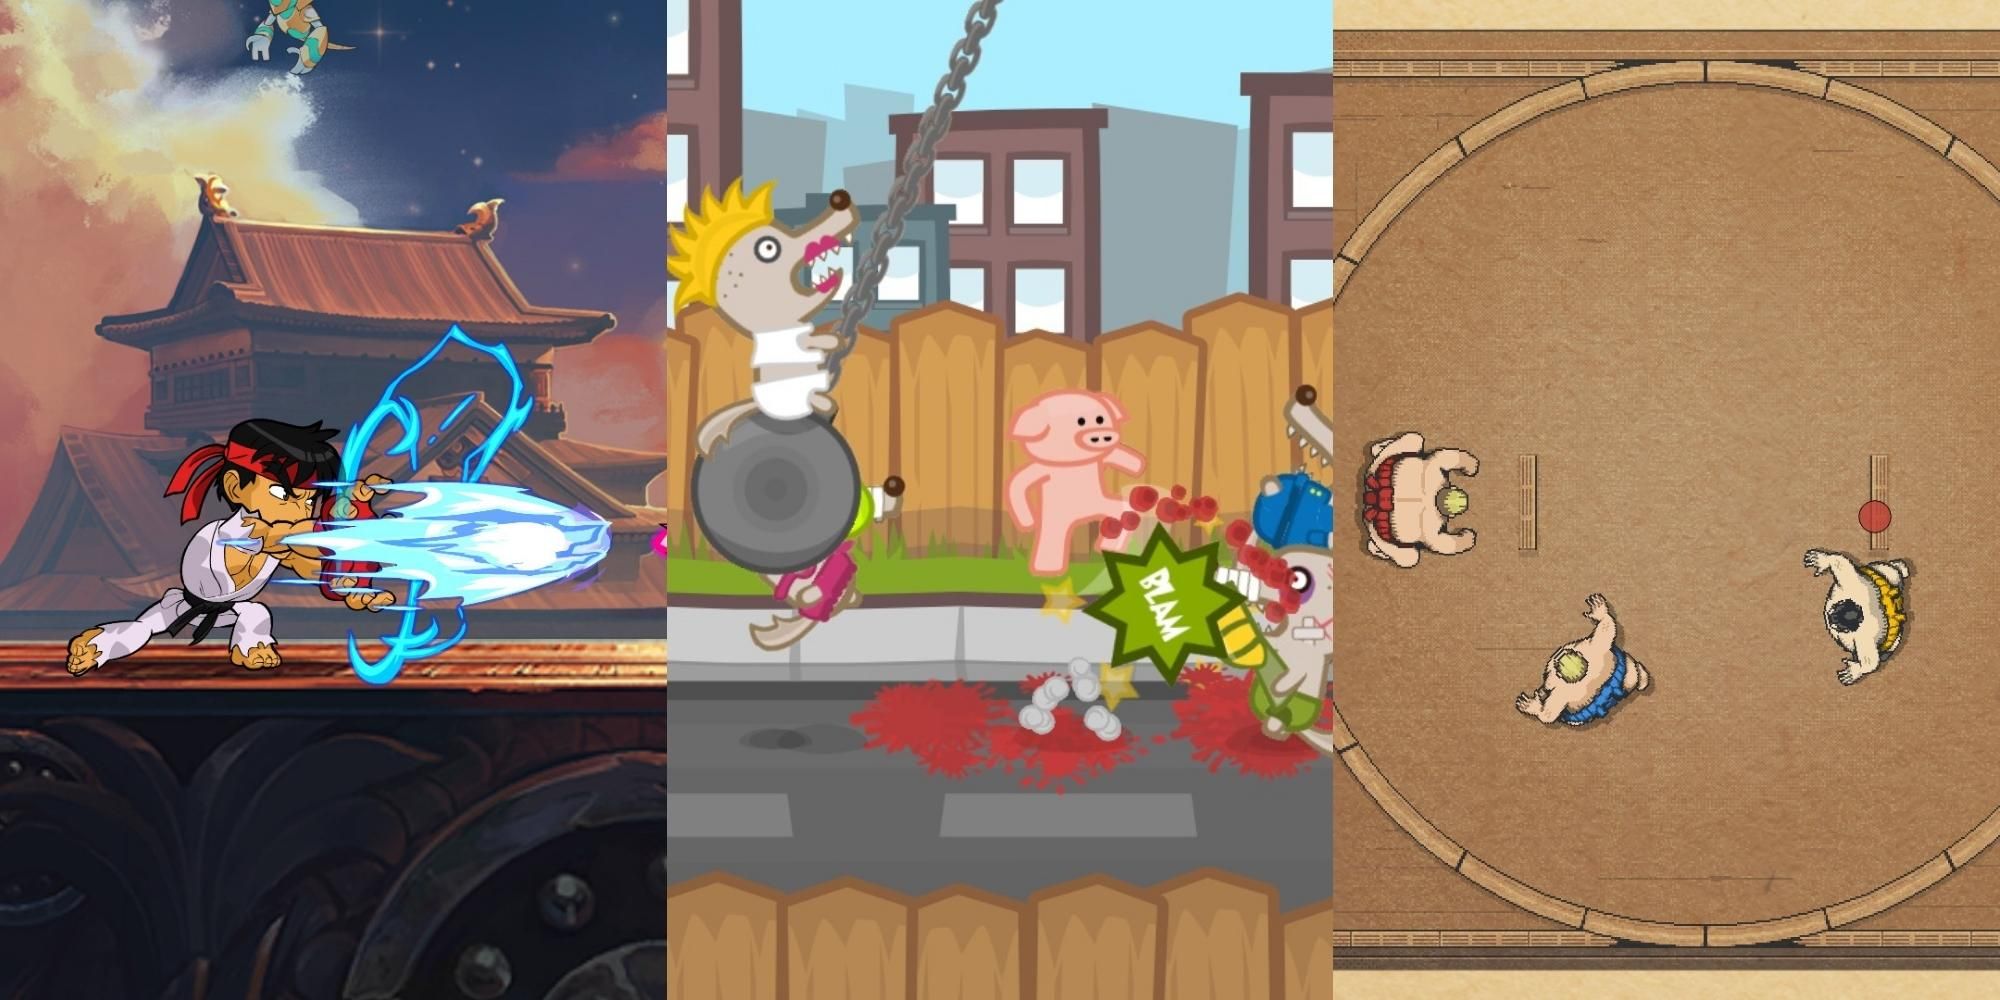 characters fighting in Brawlhalla , pigs and wolves fight in Iron Snout, Sumo wrestlers in Circle of Sumo Online Rumble!